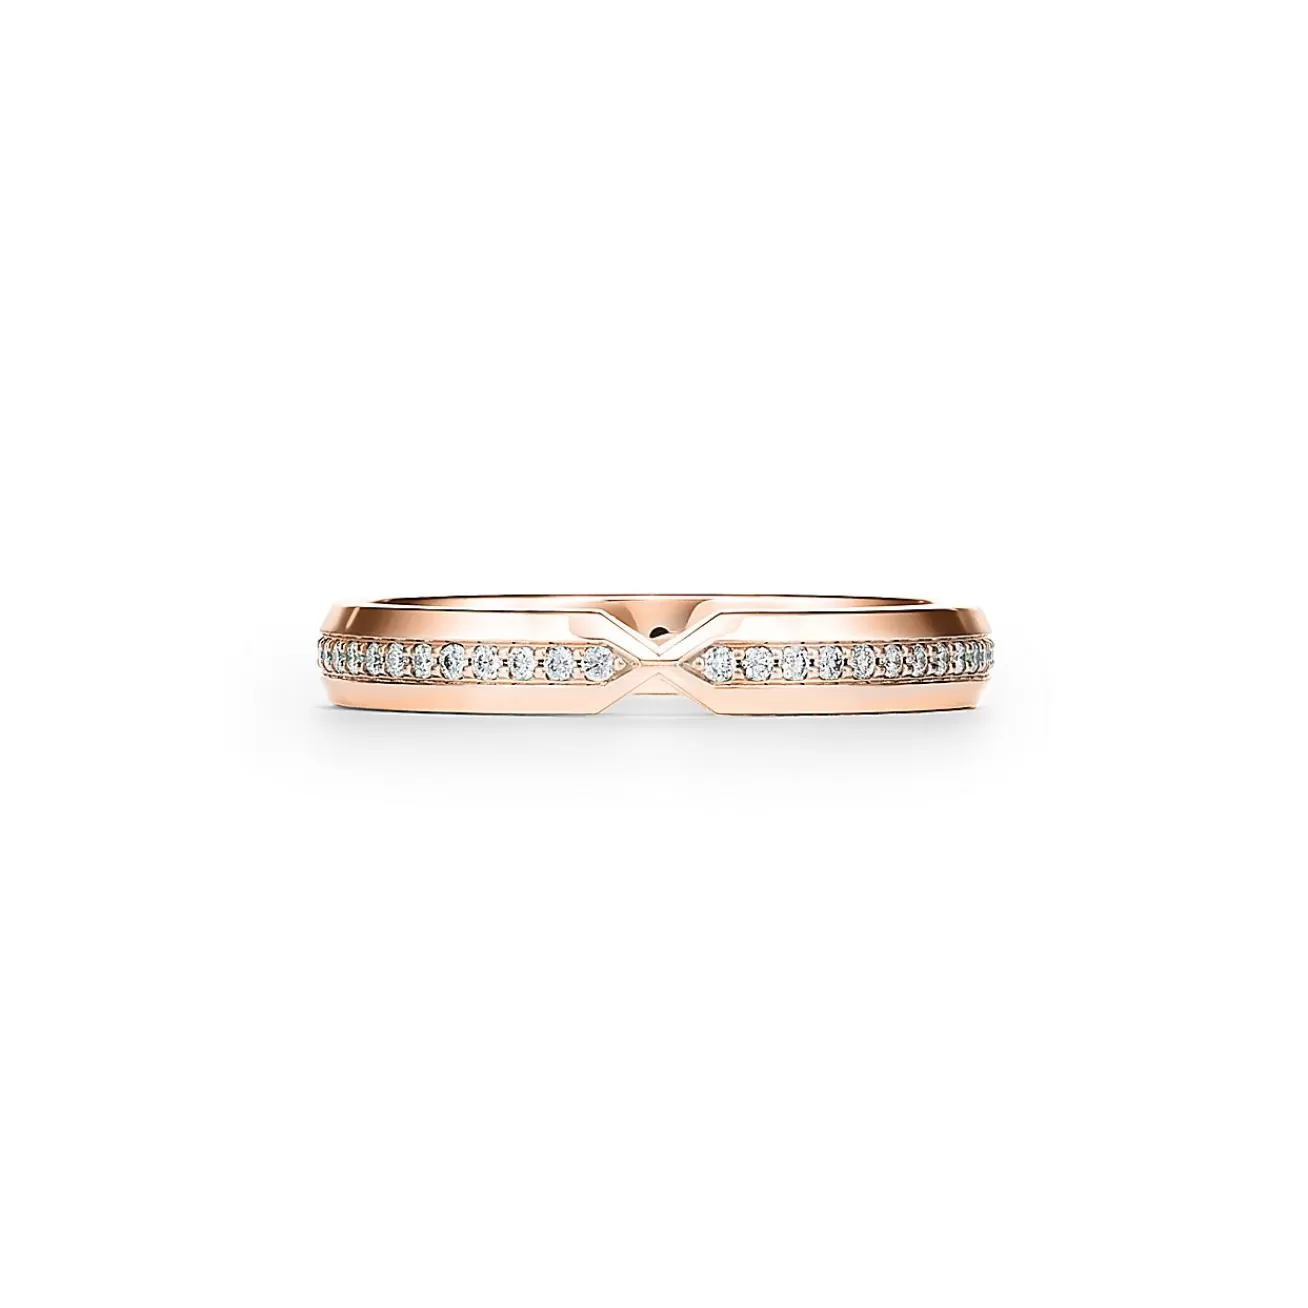 Tiffany & Co. The Tiffany® Setting nesting narrow band ring in 18k rose gold with diamonds. | ^Women Rings | Stacking Rings